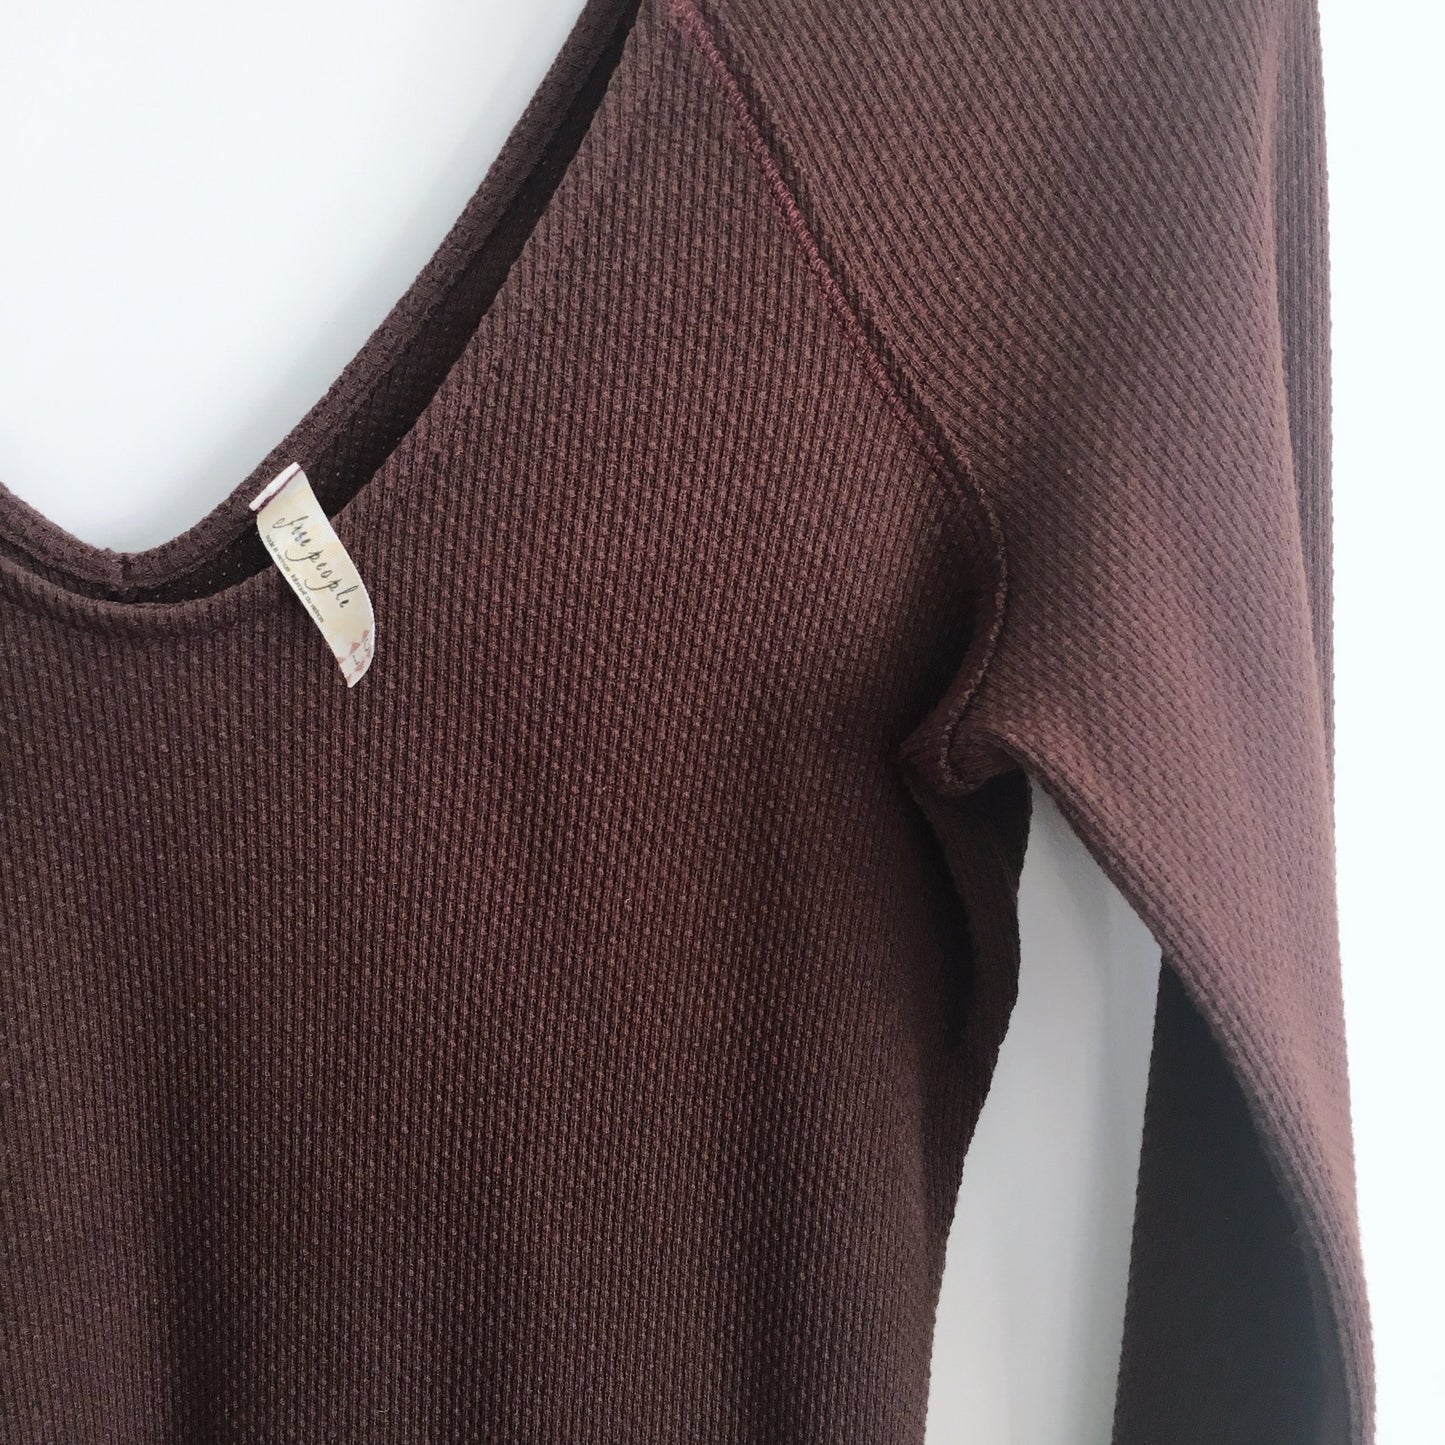 Free People Thermal with Juliet Cuff - size Large